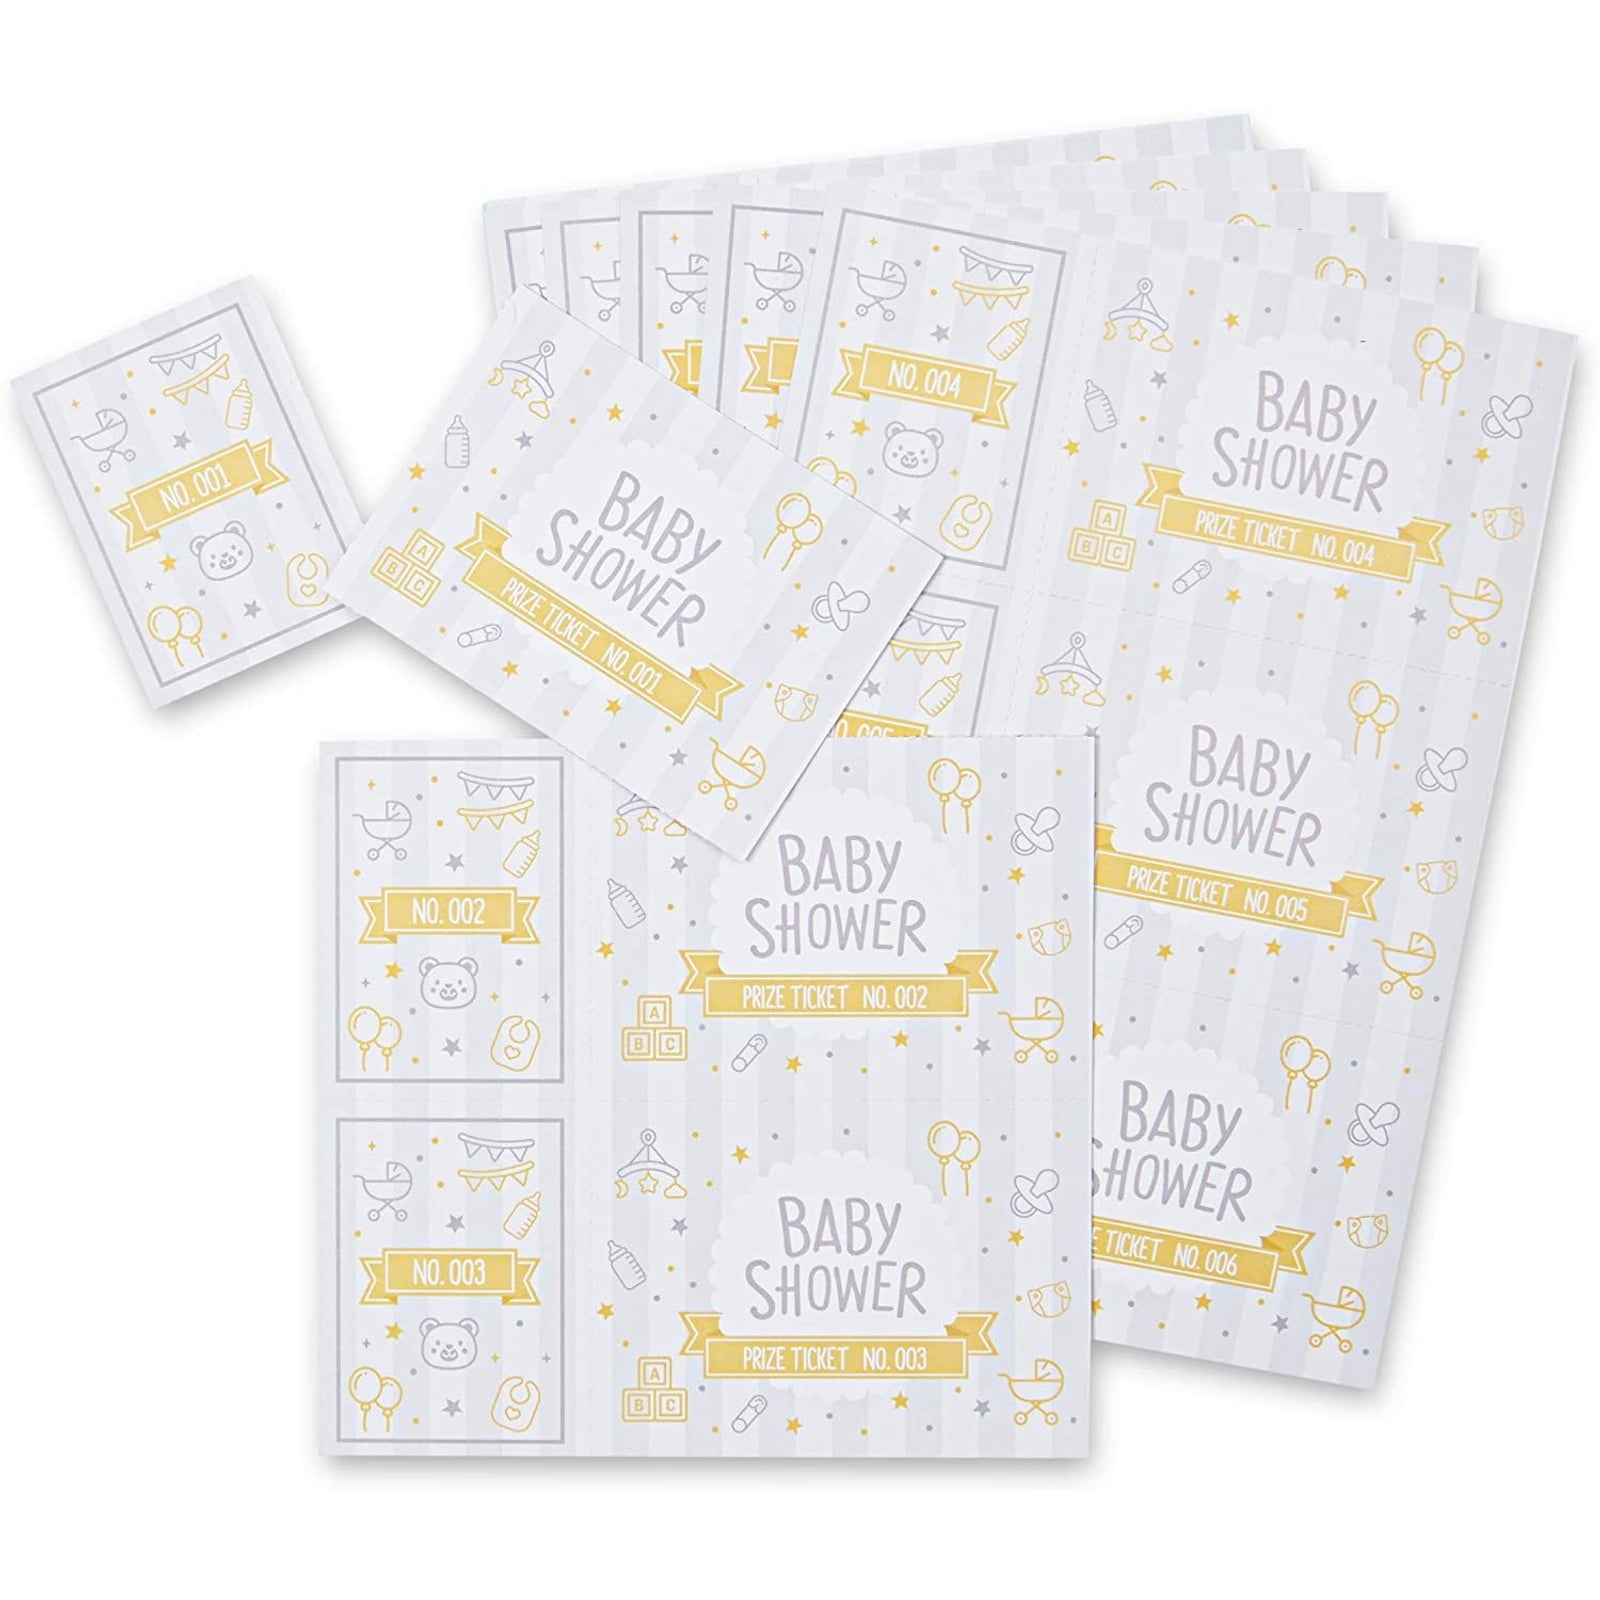 50 Yellow Green Damask OWL Diaper Raffle Tickets baby shower game lottery 